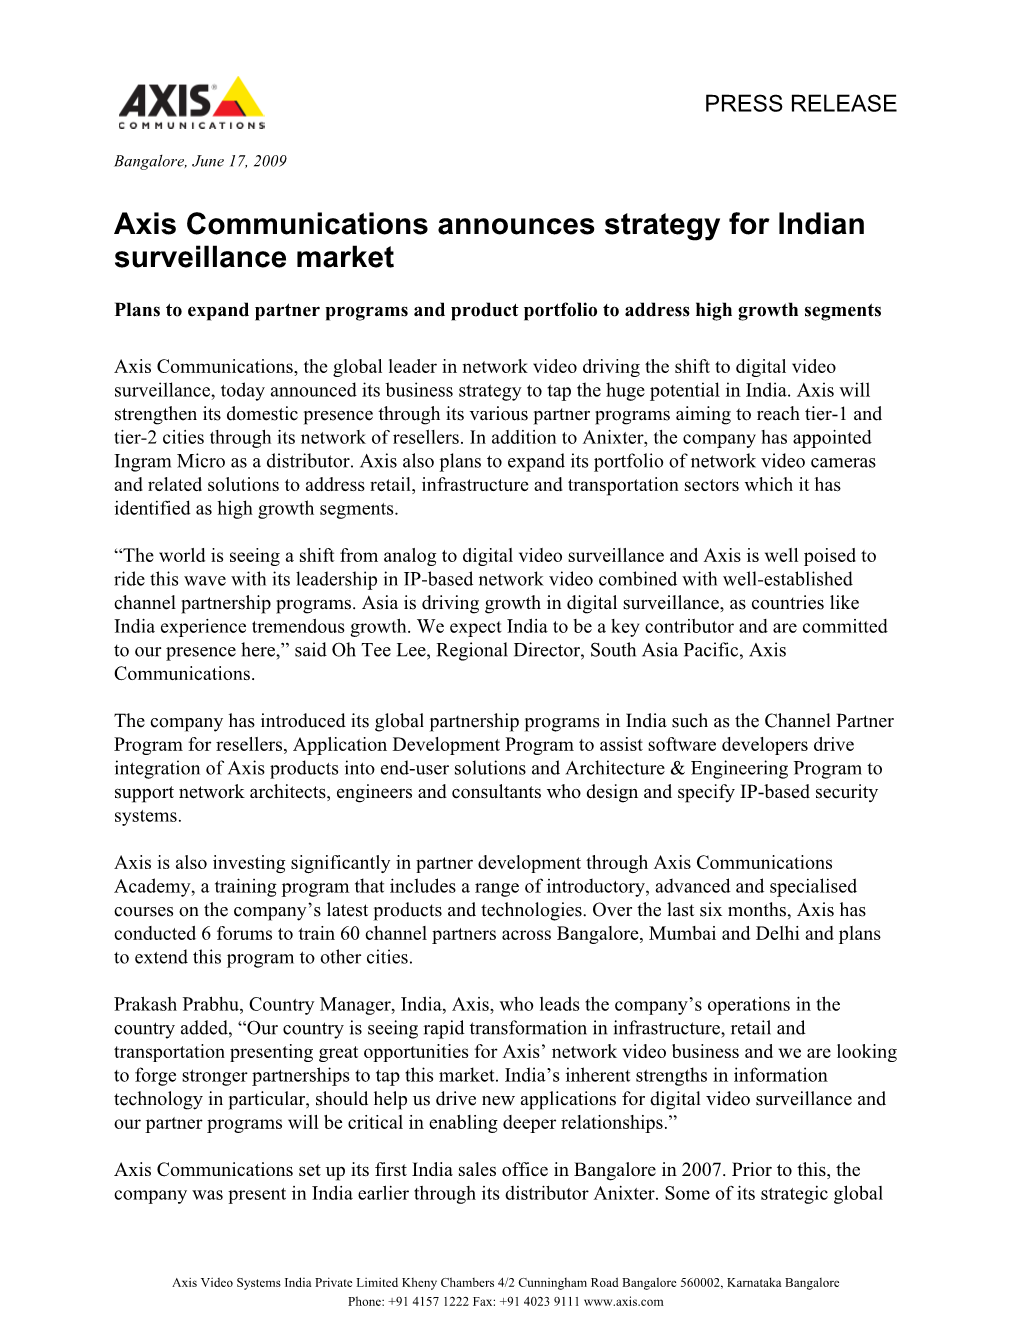 Axis Communications Announces Strategy for Indian Surveillance Market